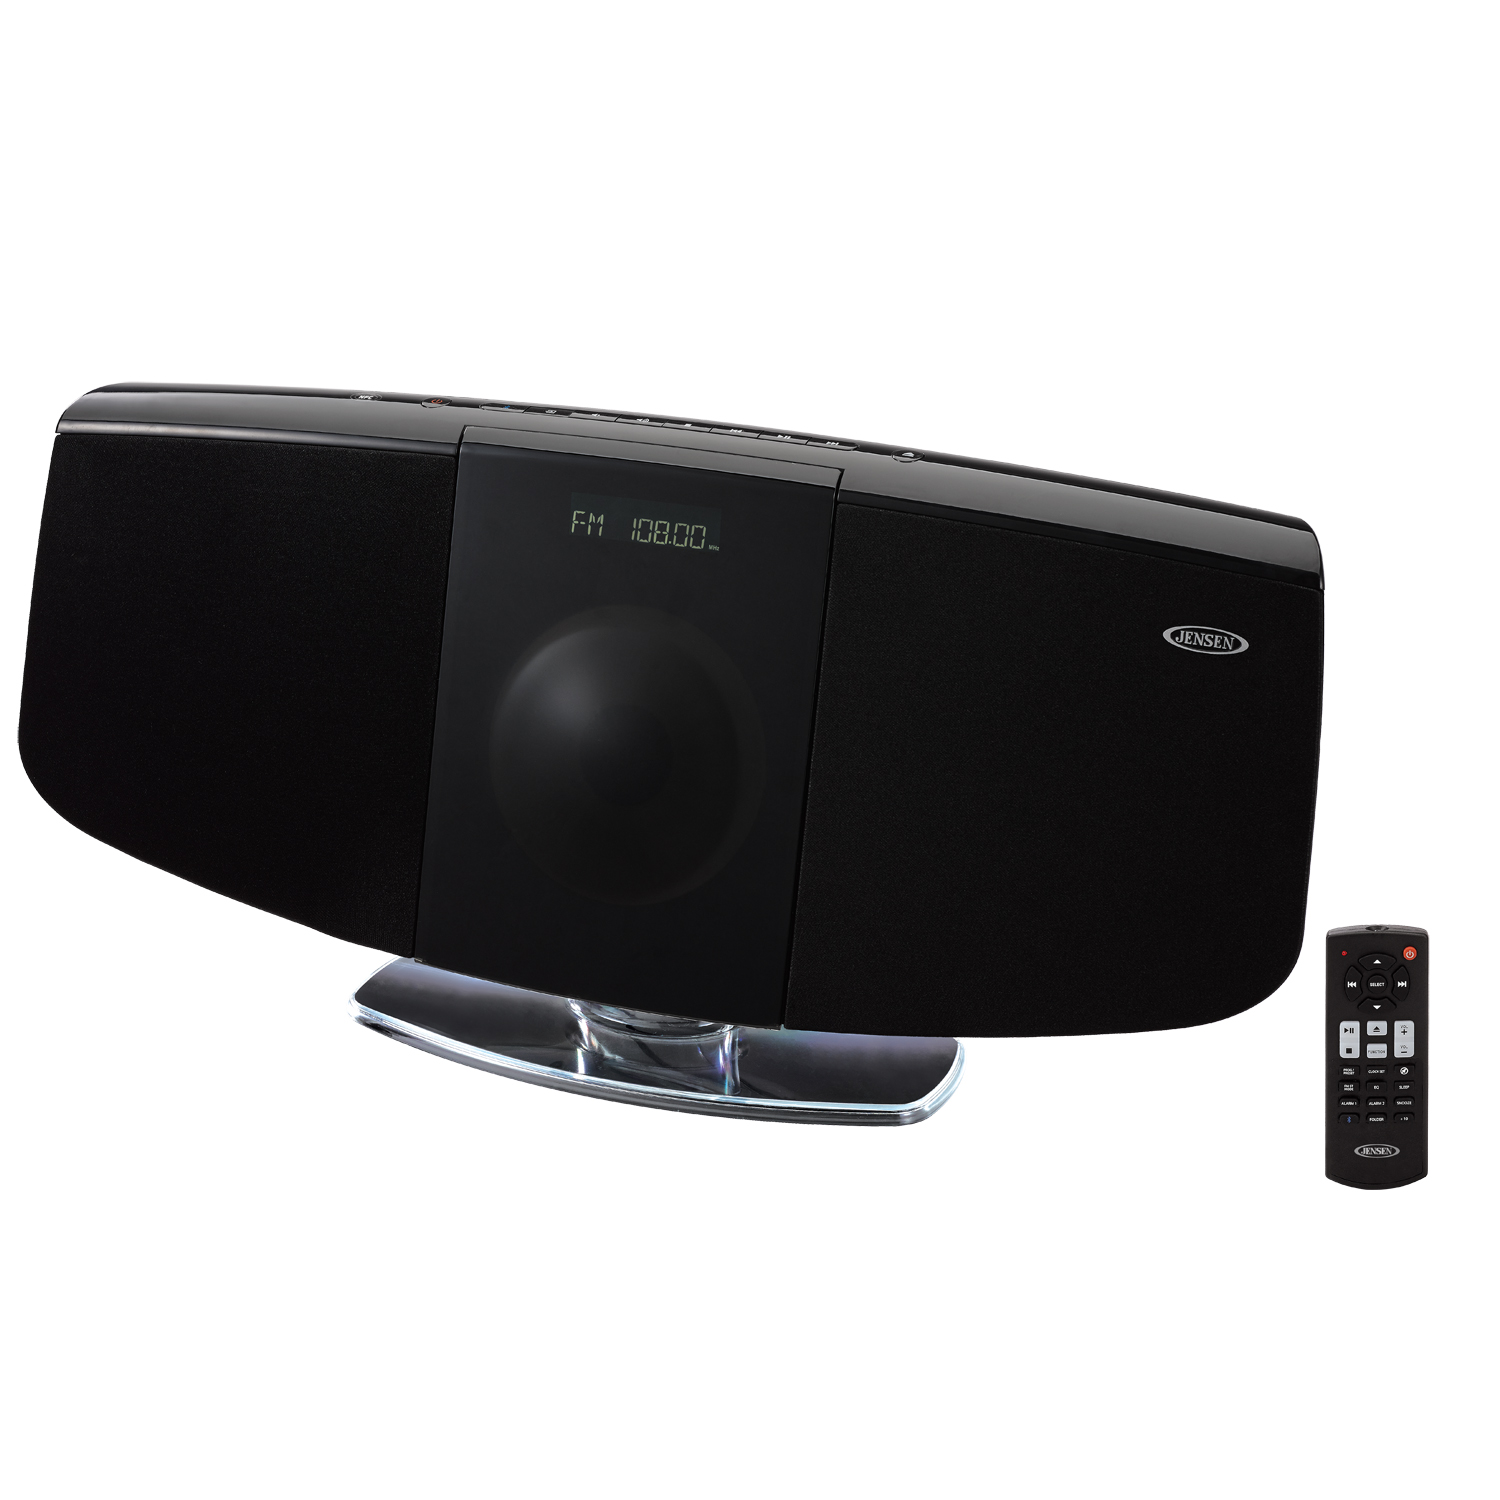 Jensen JBS-350 Bluetooth Wall-Mountable Music System with CD Player - image 1 of 3